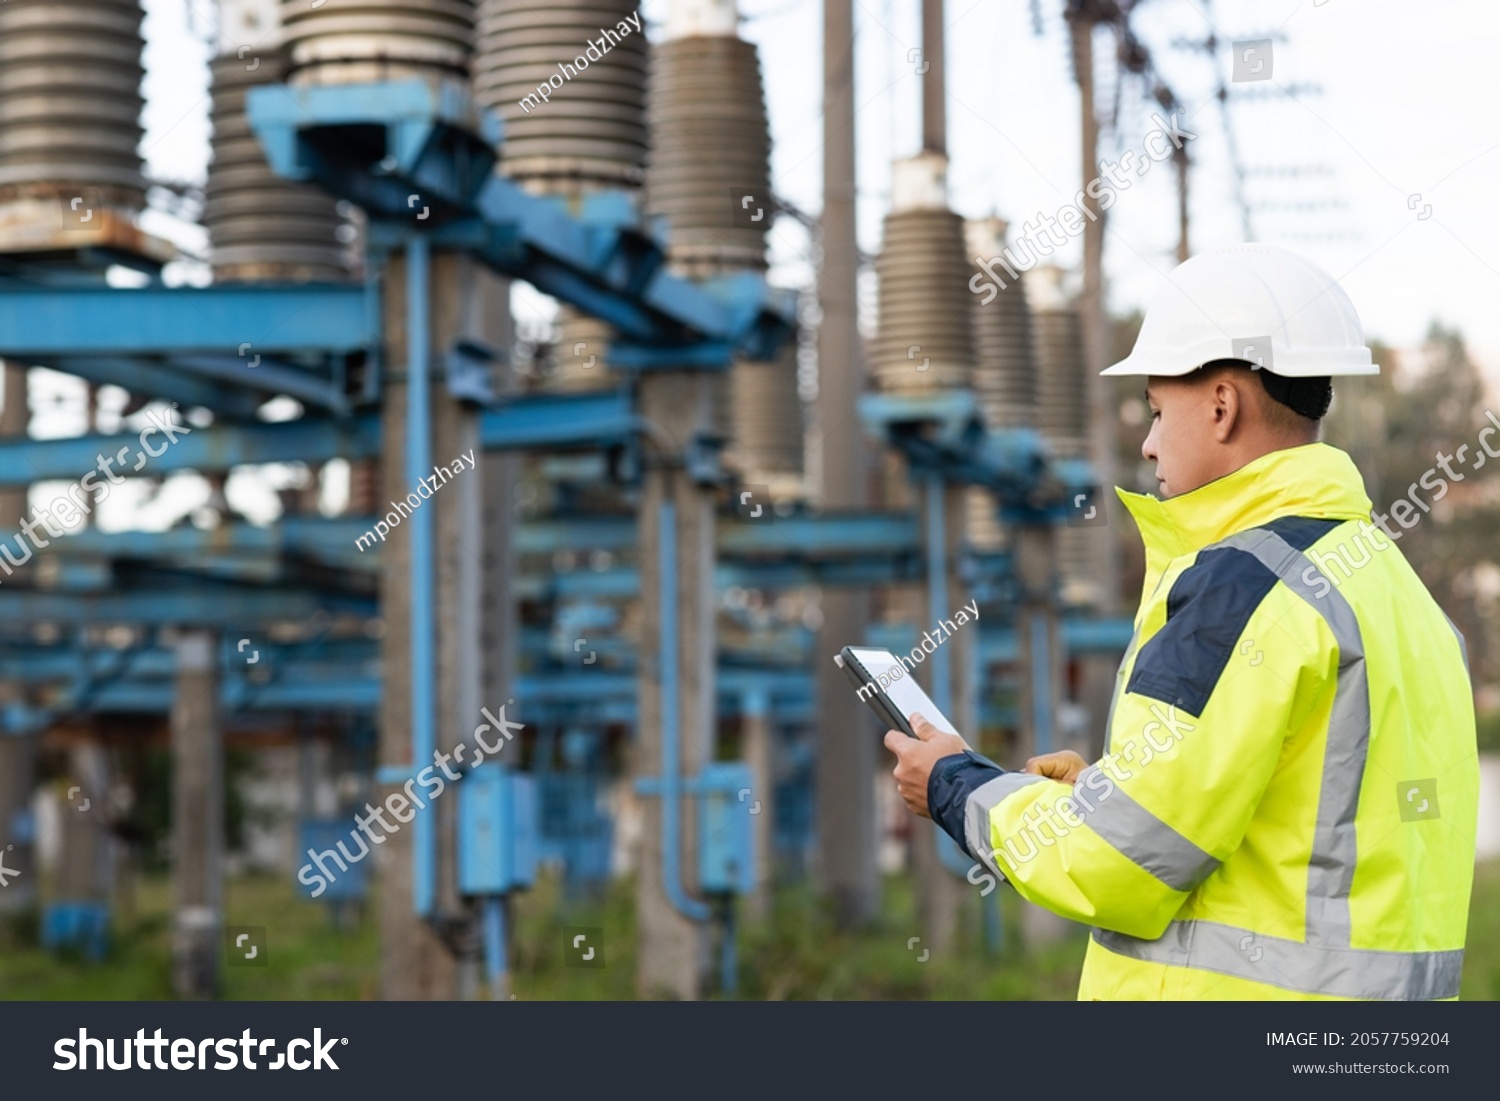 Energy business technology industry concept. Electrical engineer studying reading on tablet. Electrical worker engineer working with digital tablet near tower with electricity #2057759204